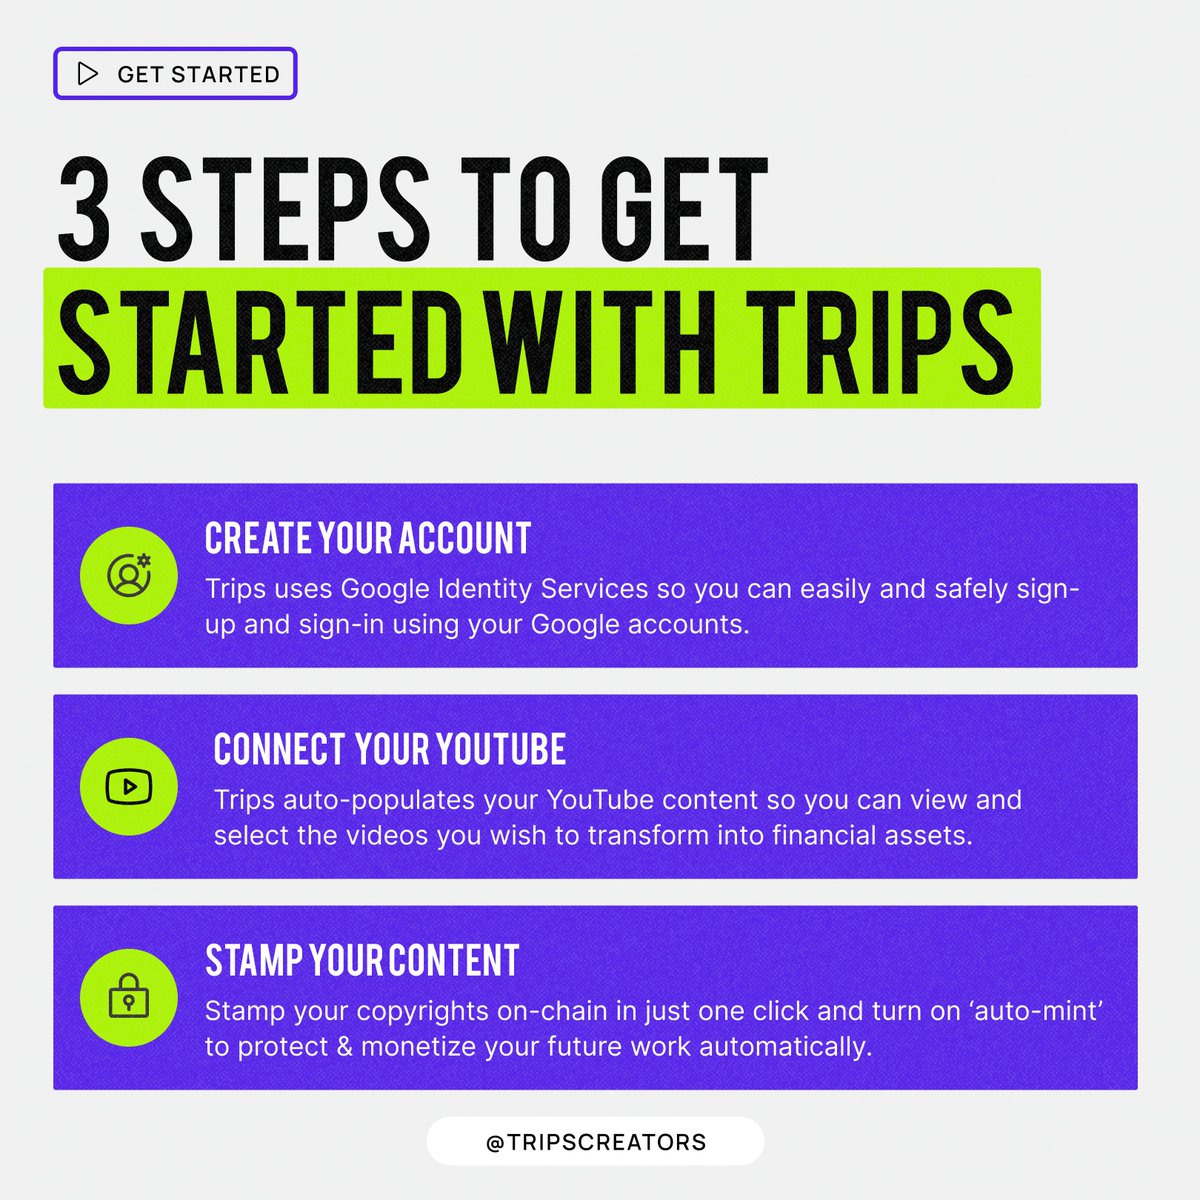 Trips is so easy to use. In just 3 steps your content is safely stamped and filed on the #blockchain and you're on your way to accessing liquidity opportunities from our pre-approved capital providers. What are you waiting for? Check it out! #TripsCreators